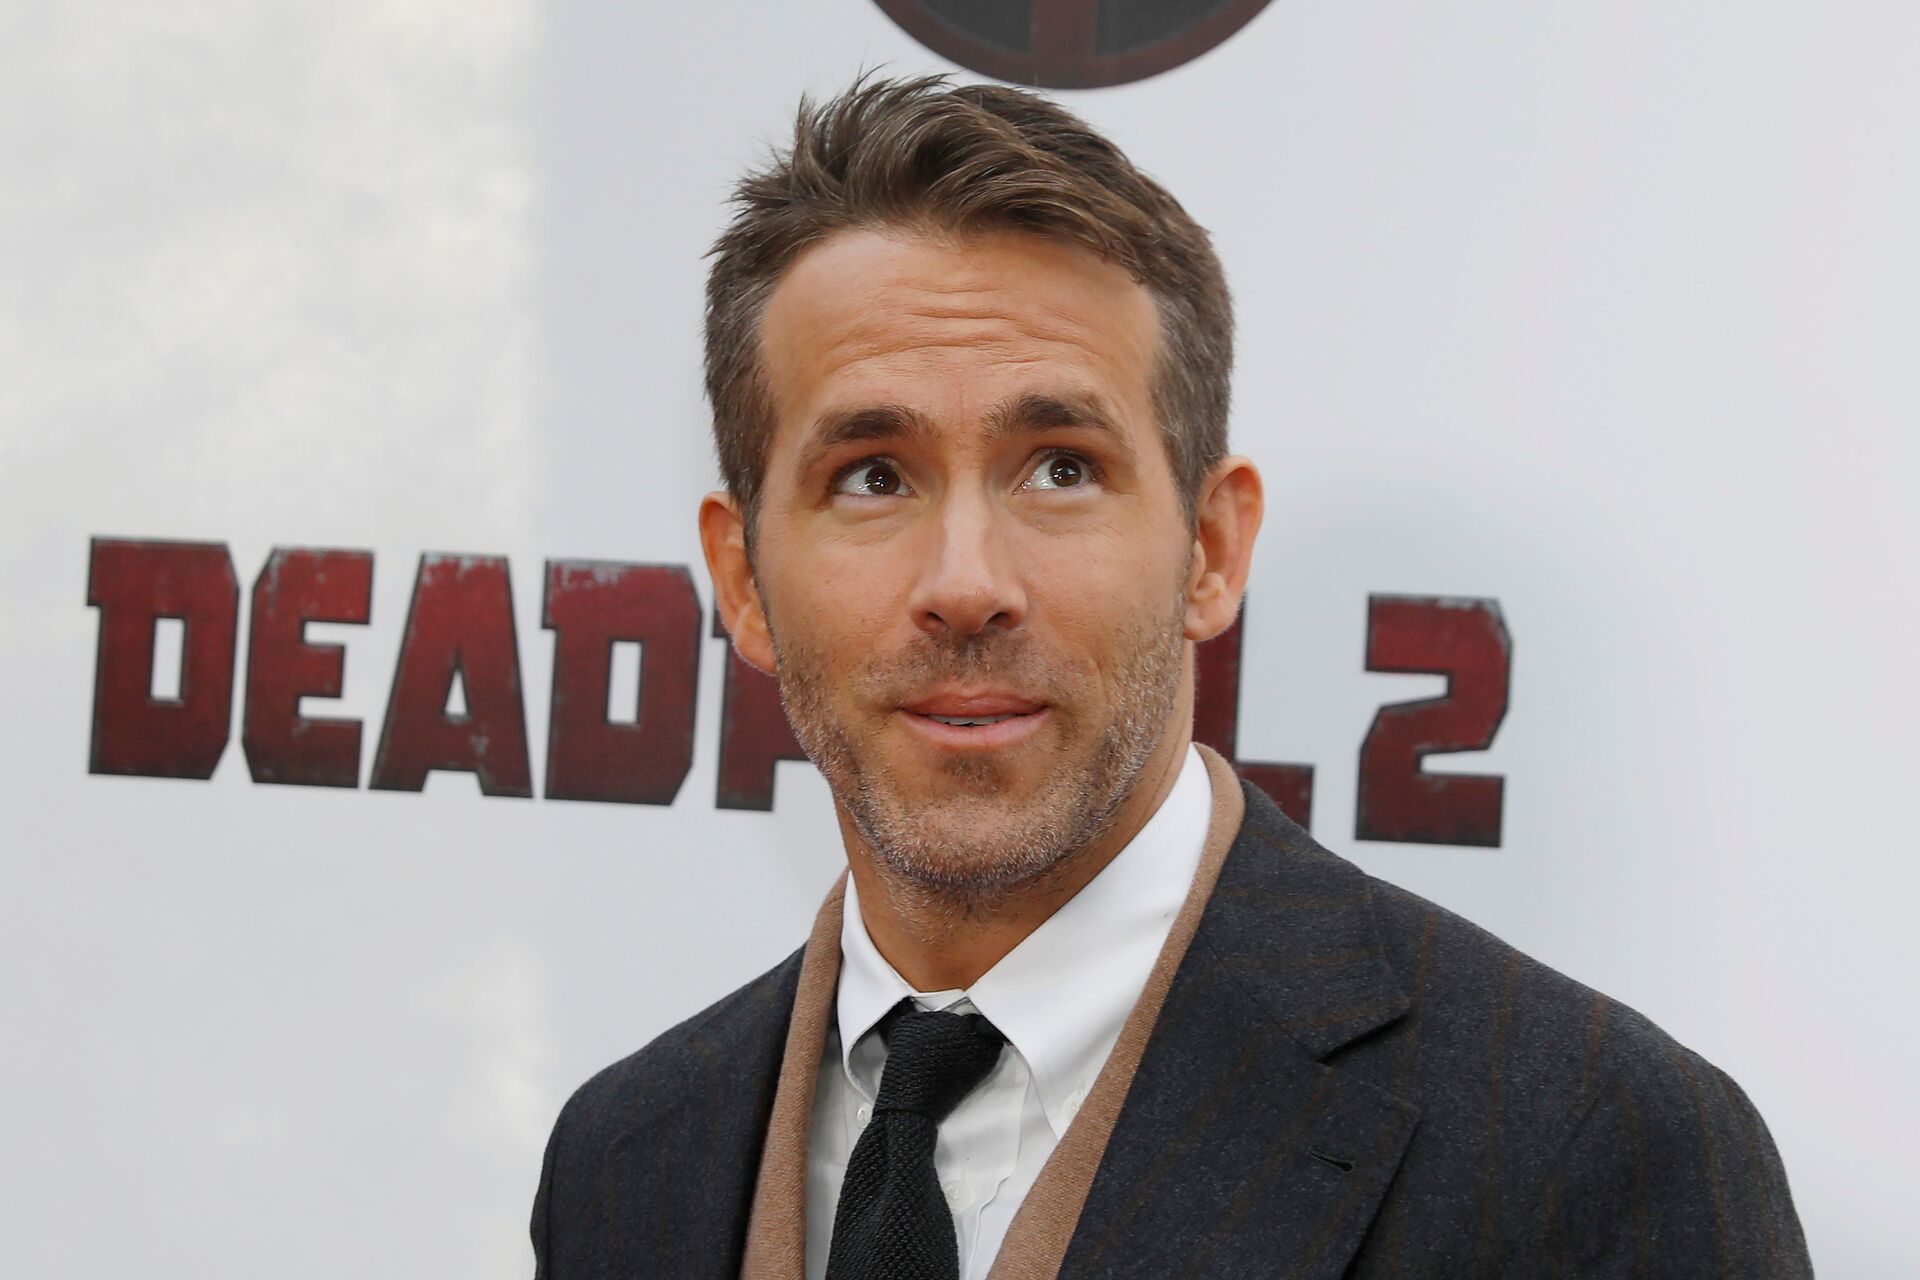 Actor Ryan Reynolds poses on the red carpet during the premiere of Deadpool 2 in Manhattan, New York, U.S., May 14, 2018. - Sputnik International, 1920, 22.10.2021